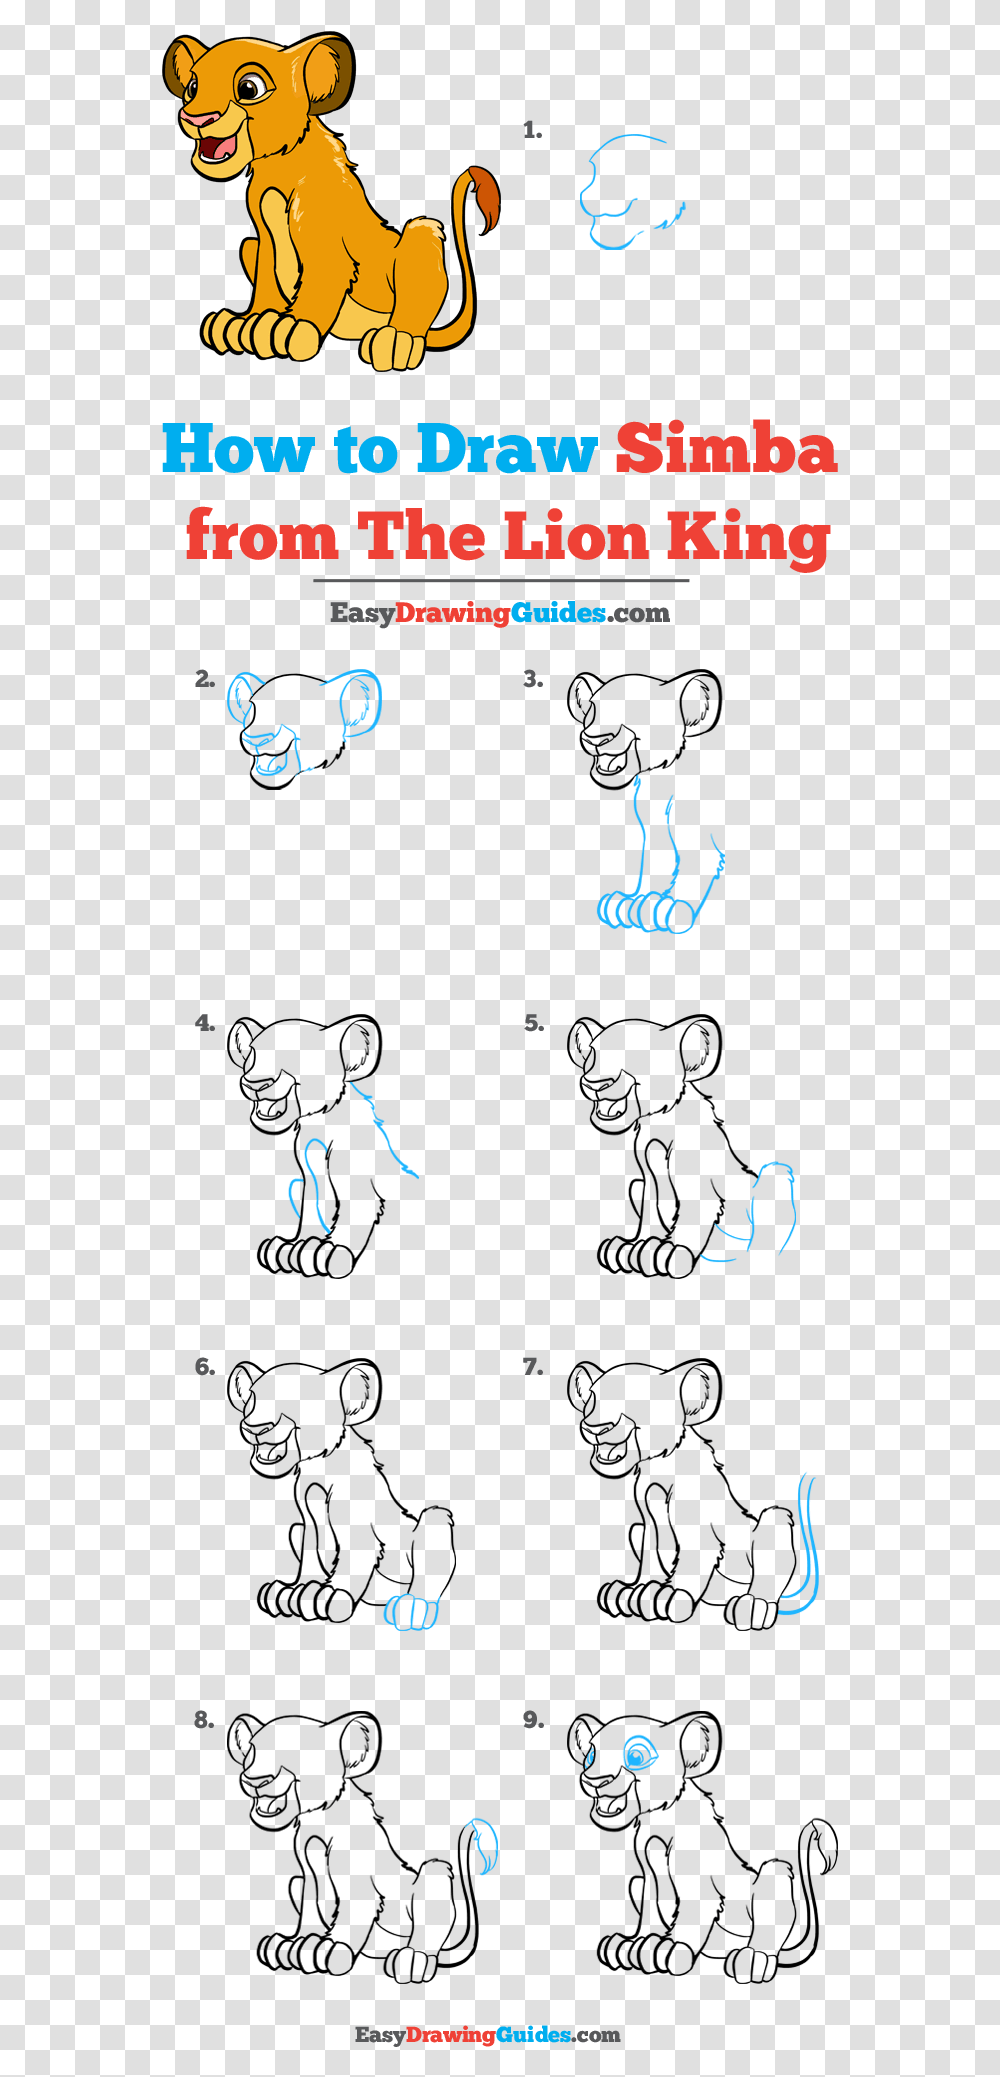 How To Draw Simba From The Lion King Draw Simba From Lion King Easy, Poster, Advertisement Transparent Png